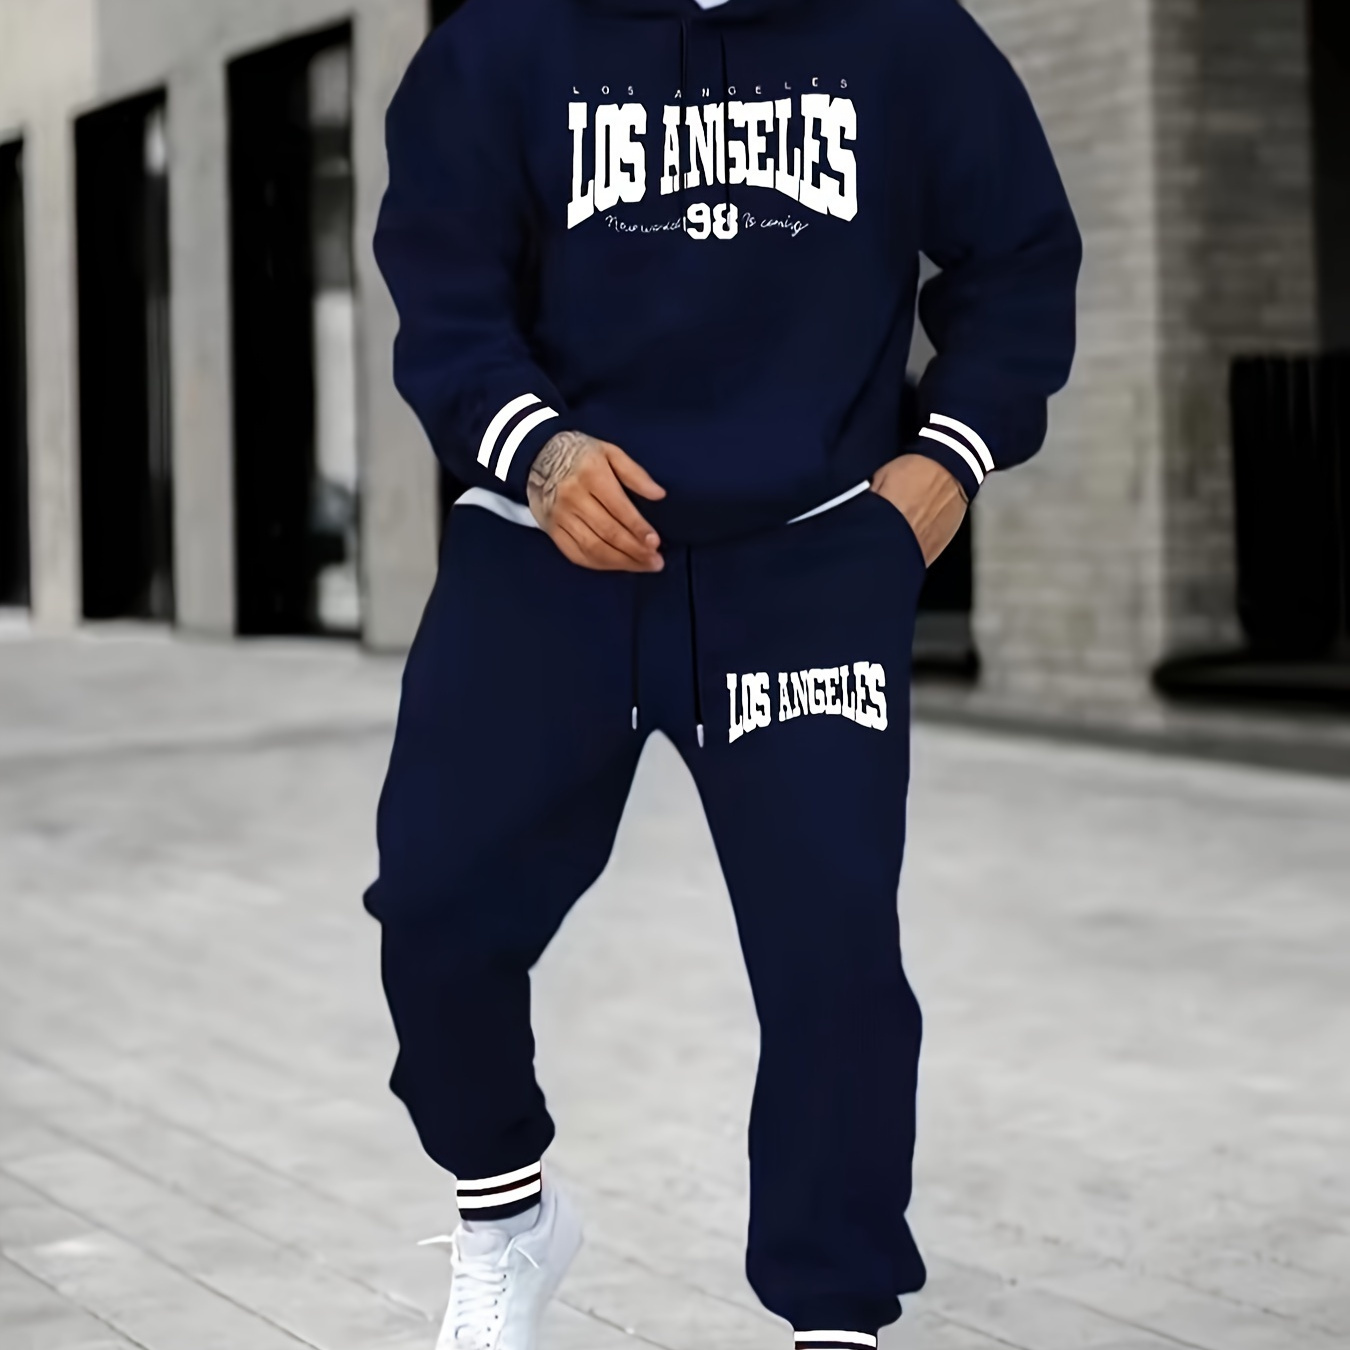 

Los Angeles 98 Hoodie & Jogger Pants Set - Warm, Cozy, And Stylish - Perfect For Casual Outings